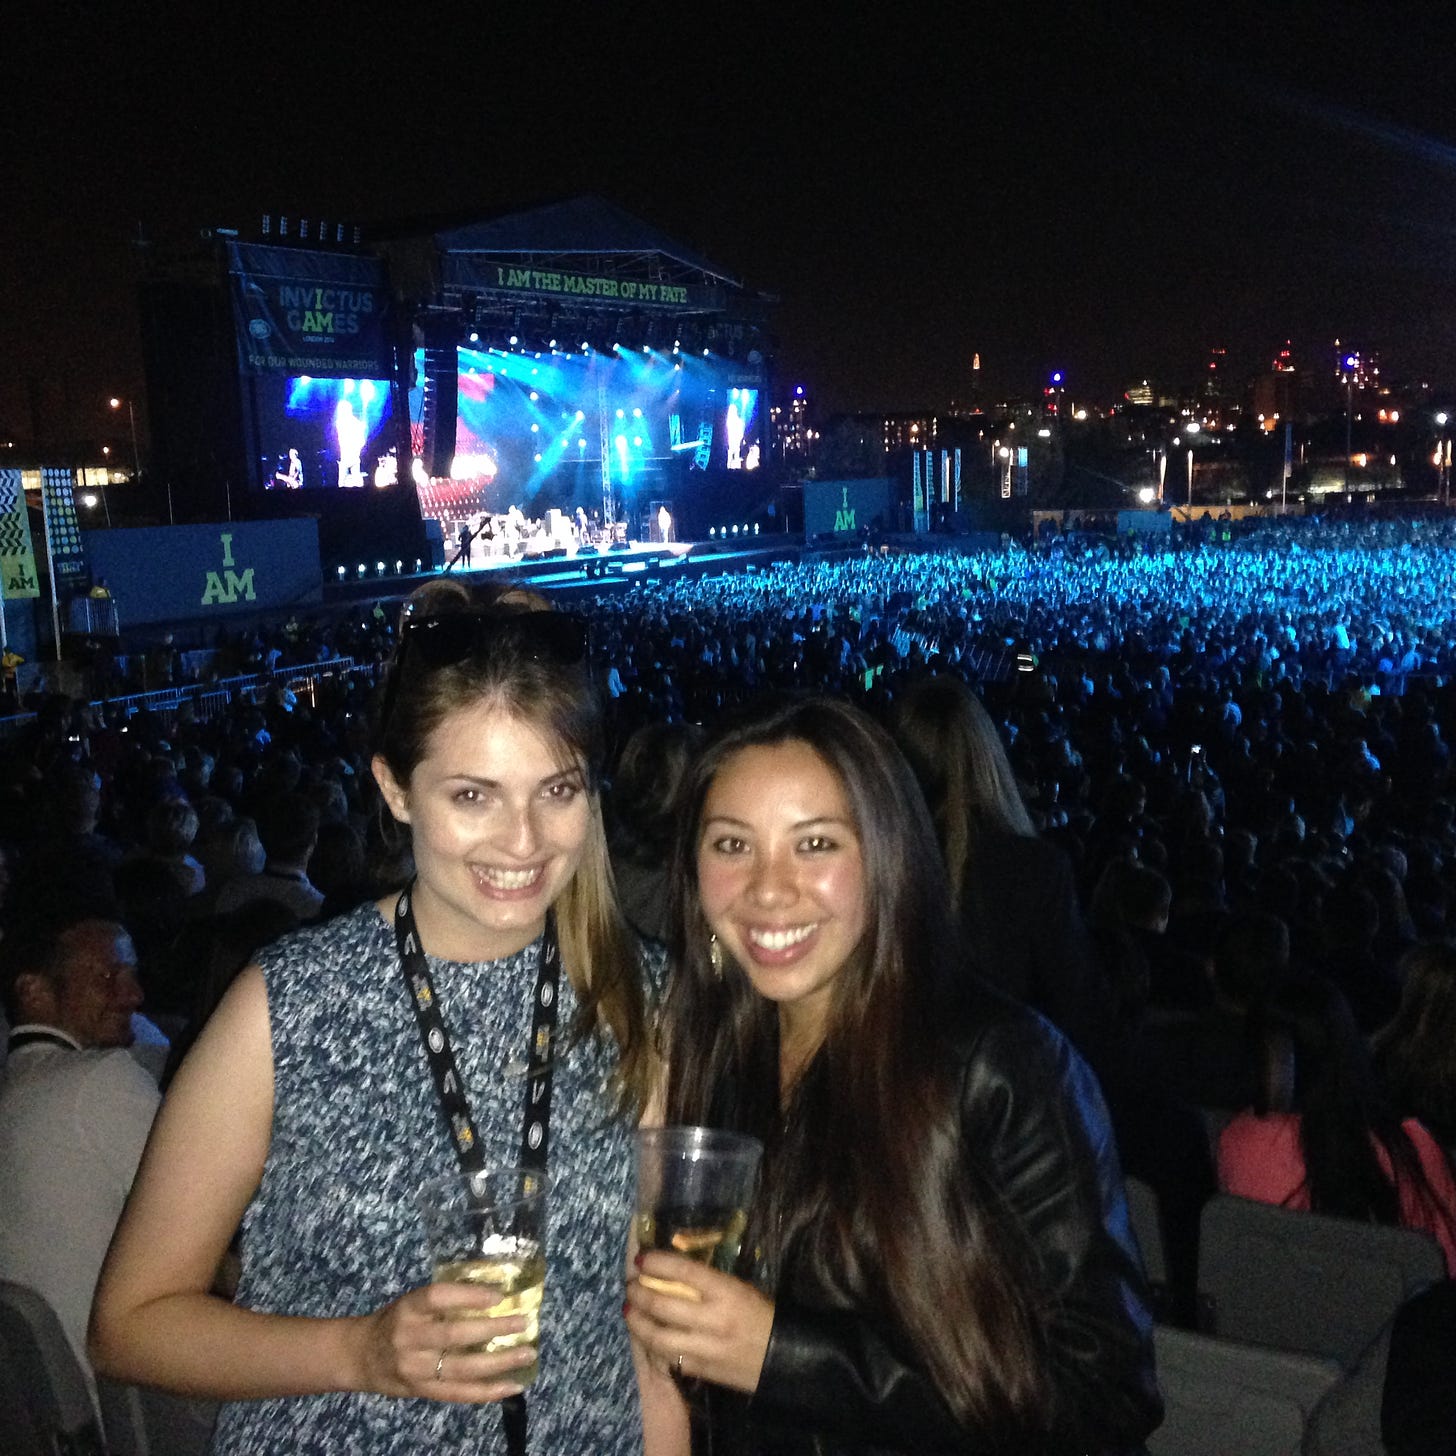 Ainhoa Barcelona and her colleague smiling and holding drinks at the 2014 Invictus Games closing concert in London